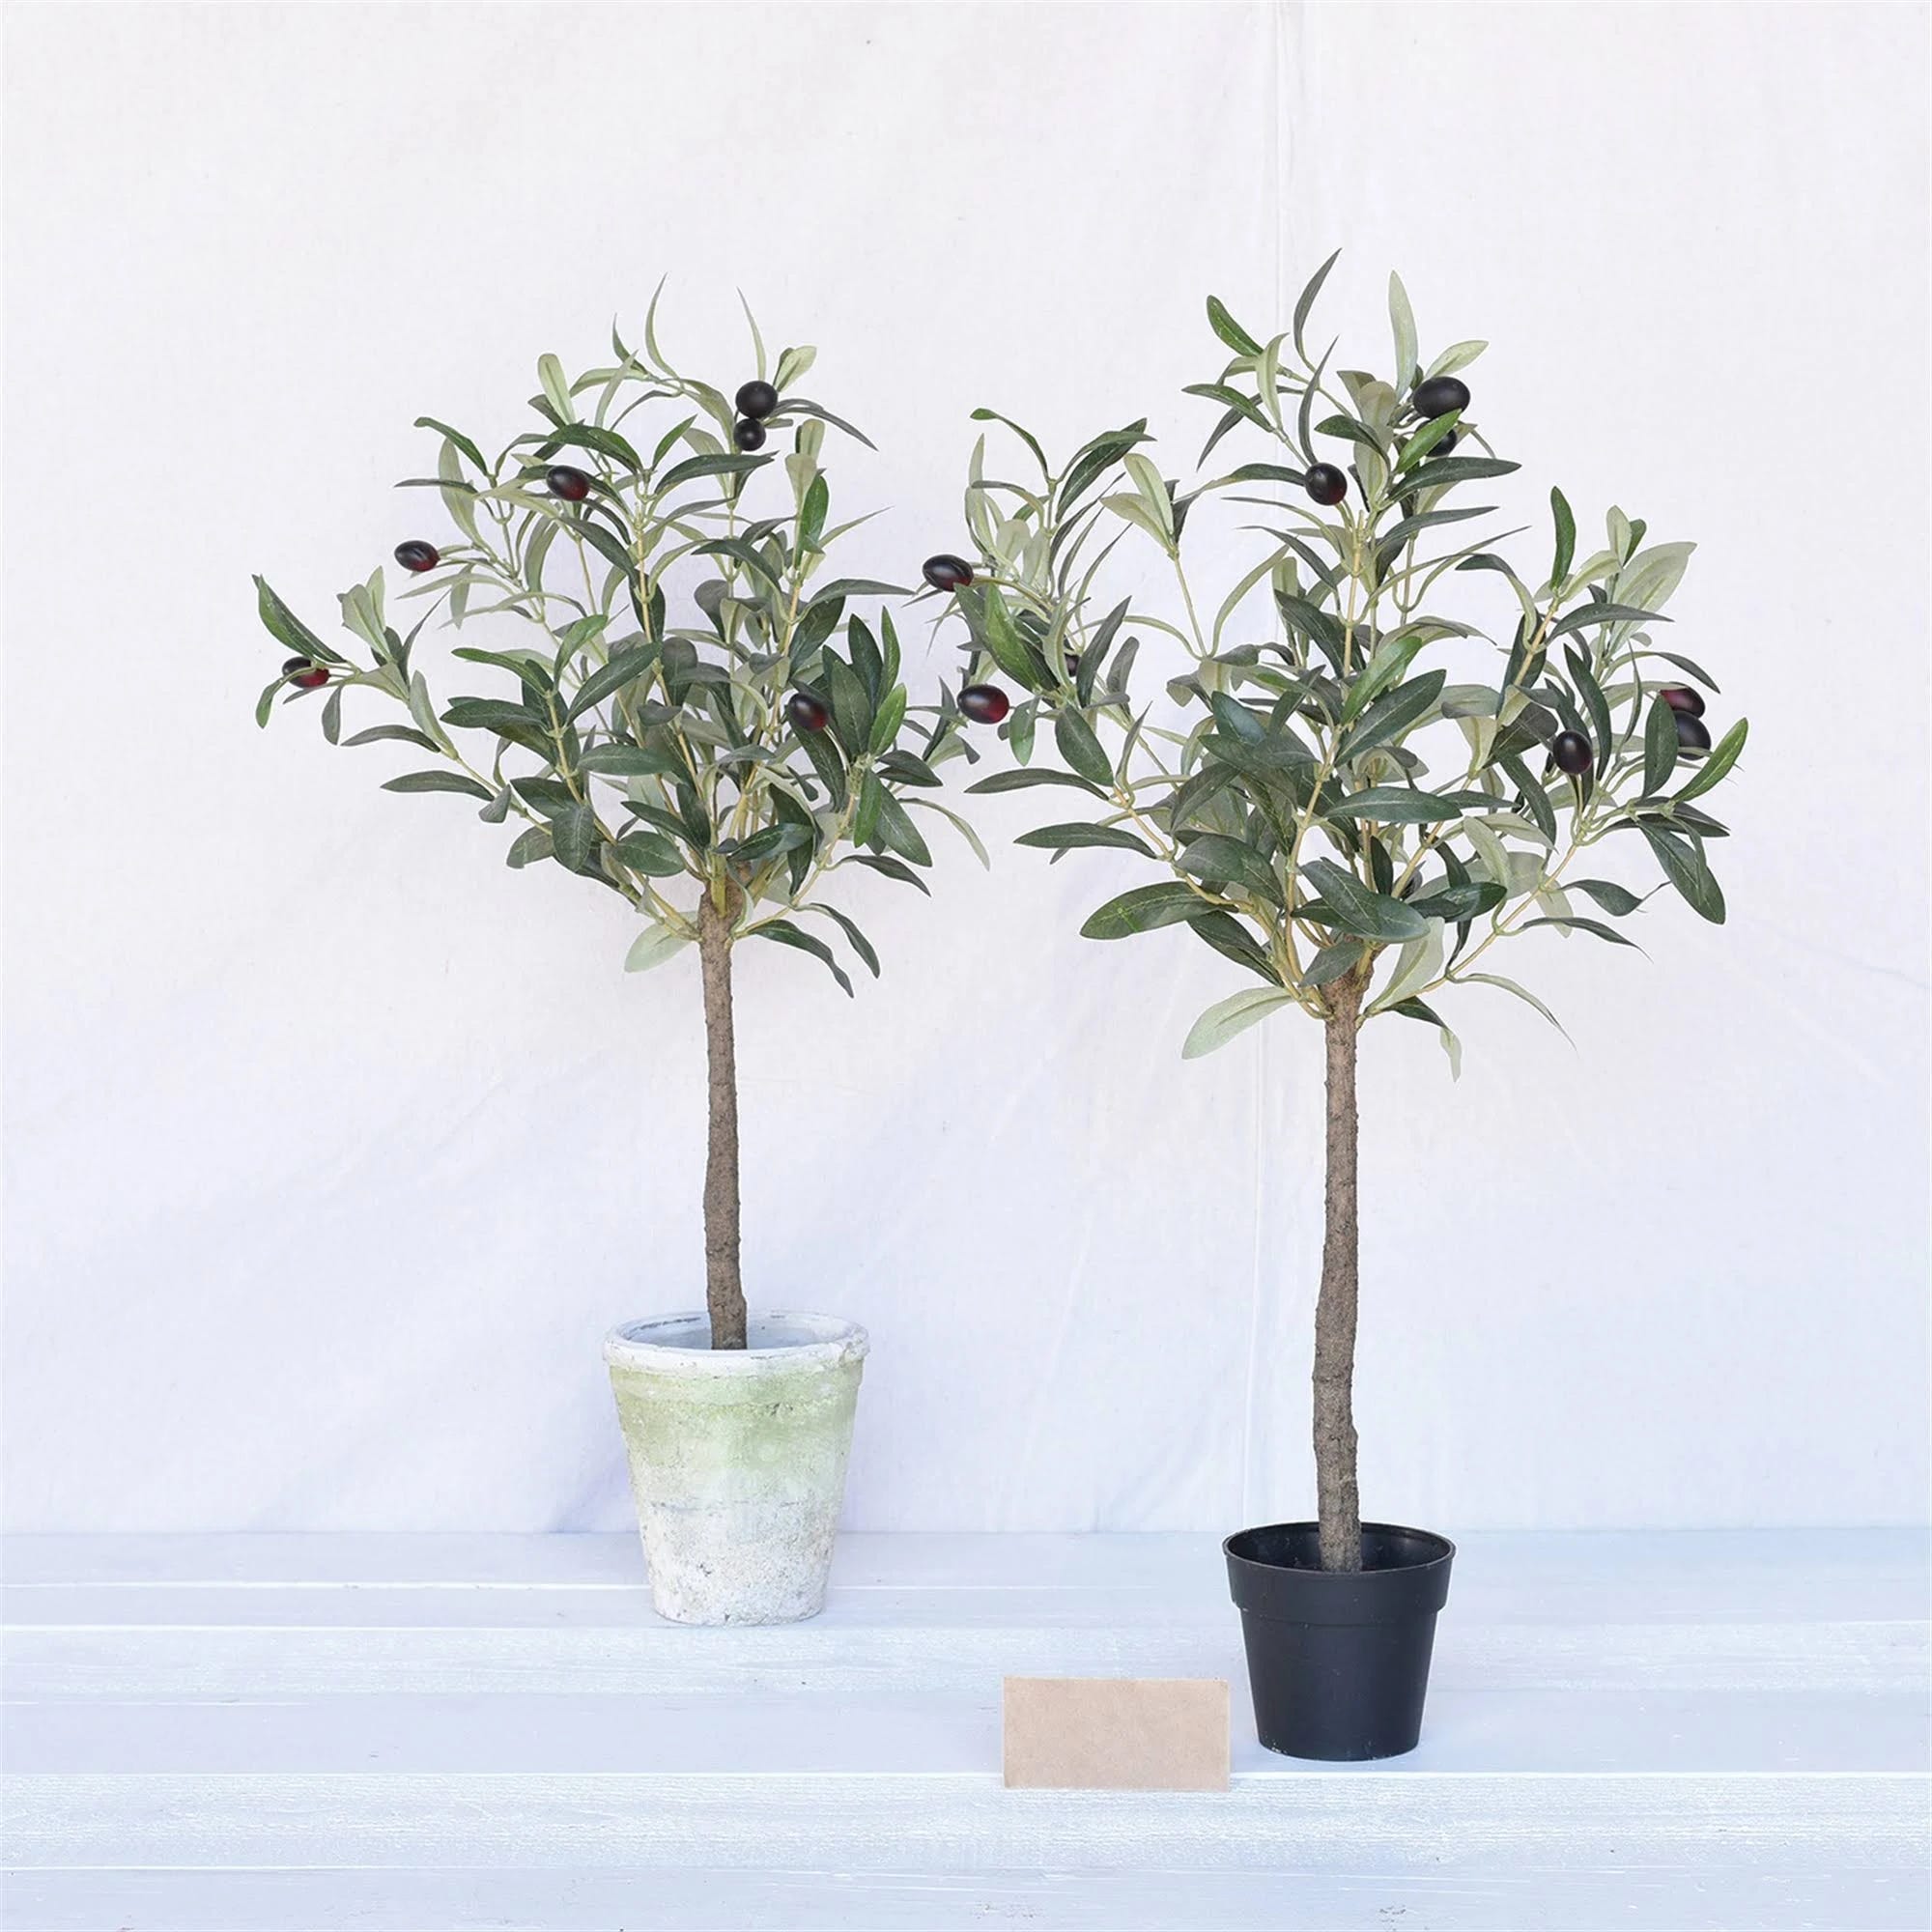 Faux Olive Tree for Indoor Decor and Serenity | Image